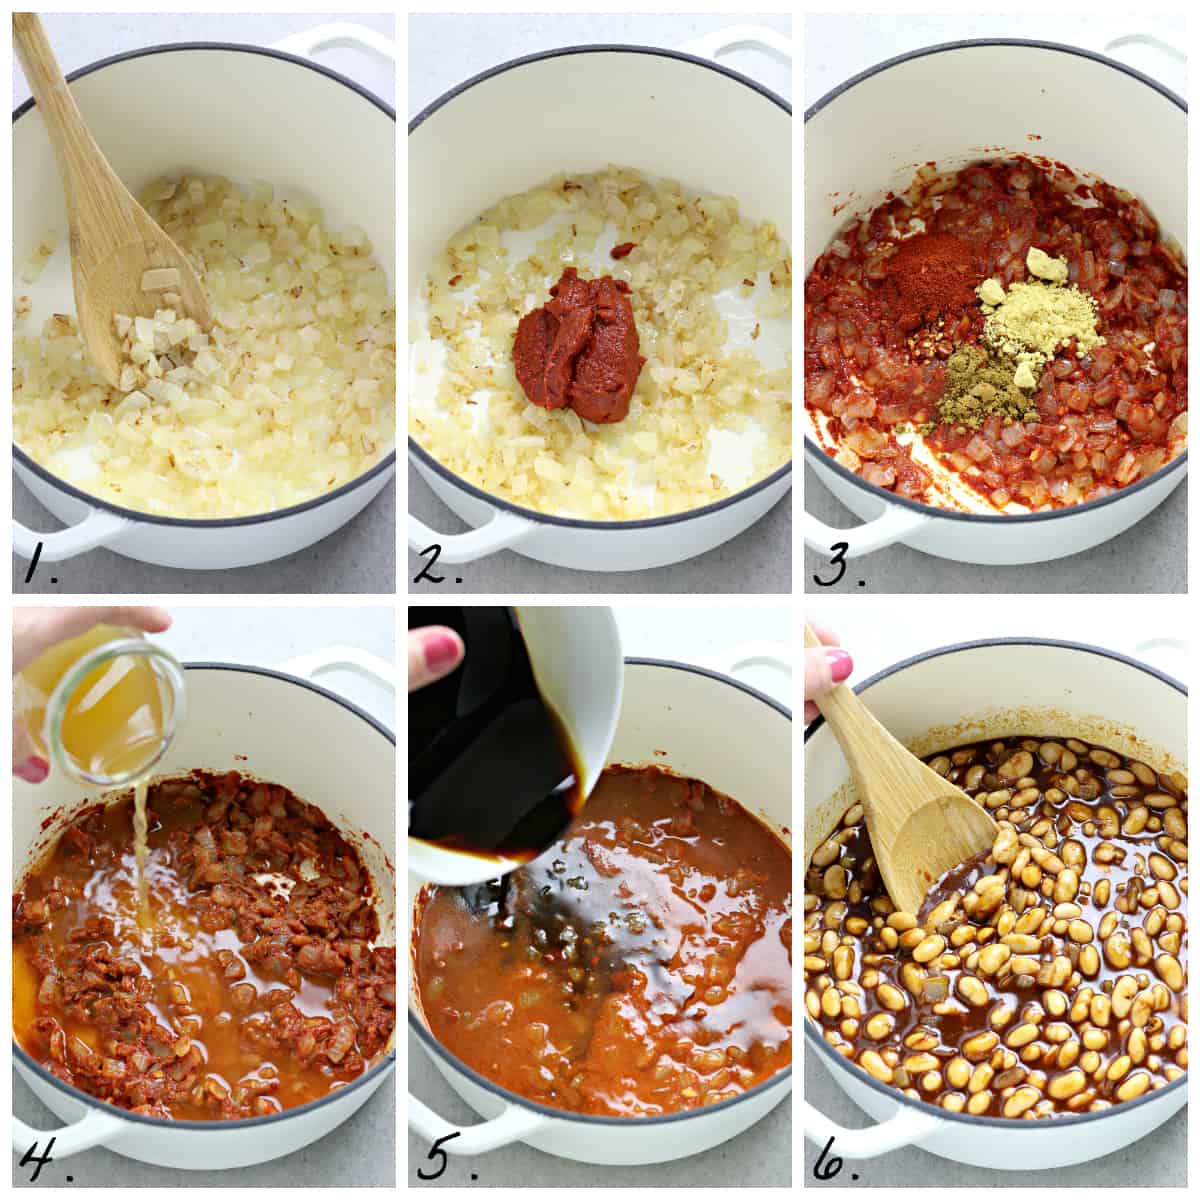 6 various process photos of cooking beans in a white pot.